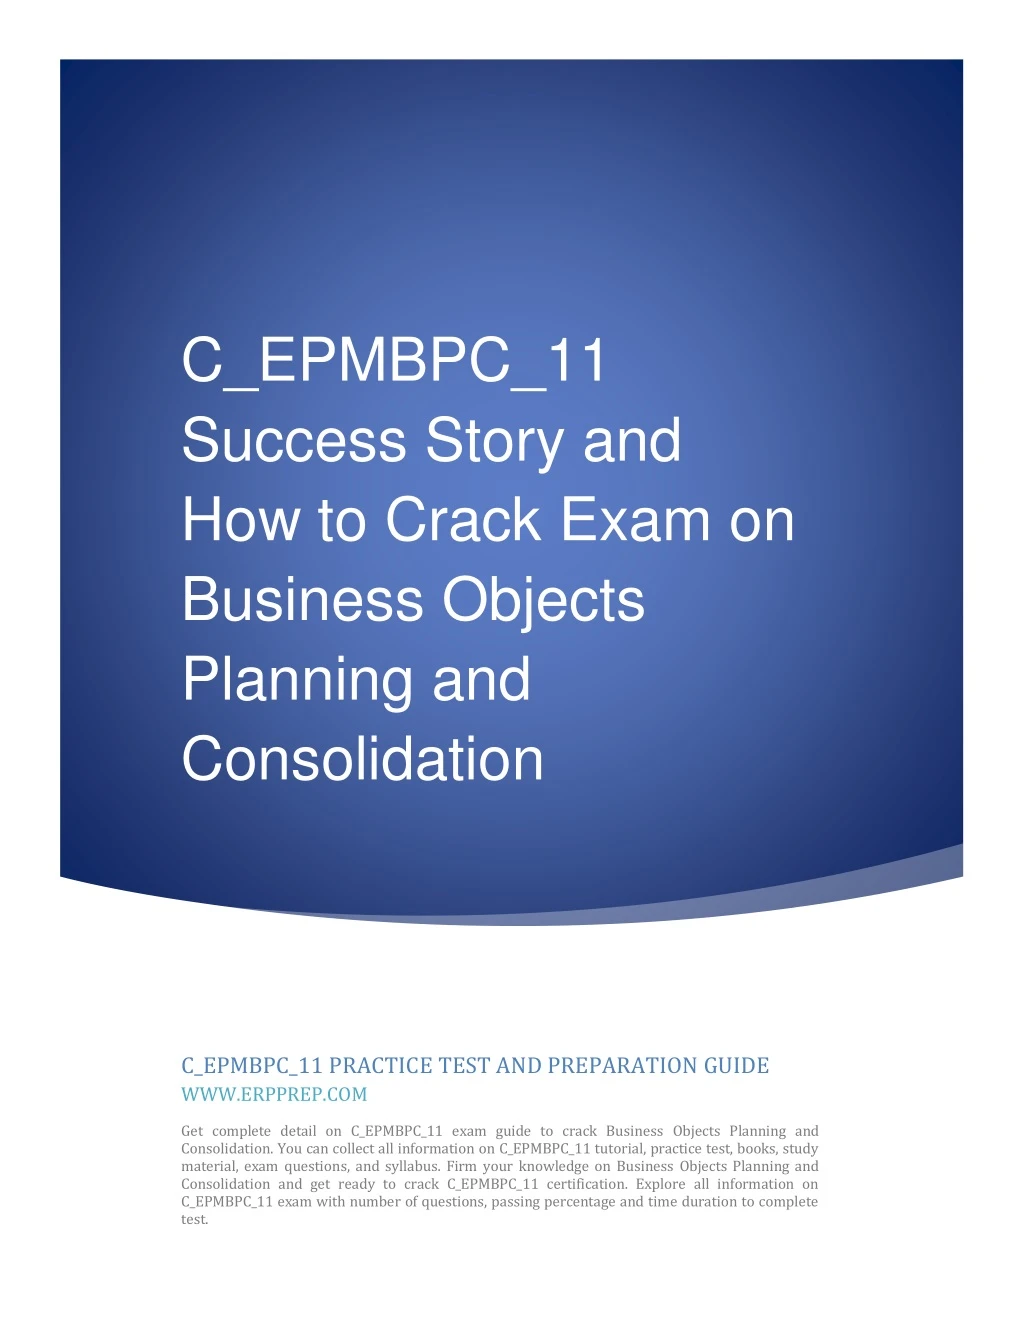 c epmbpc 11 success story and how to crack exam